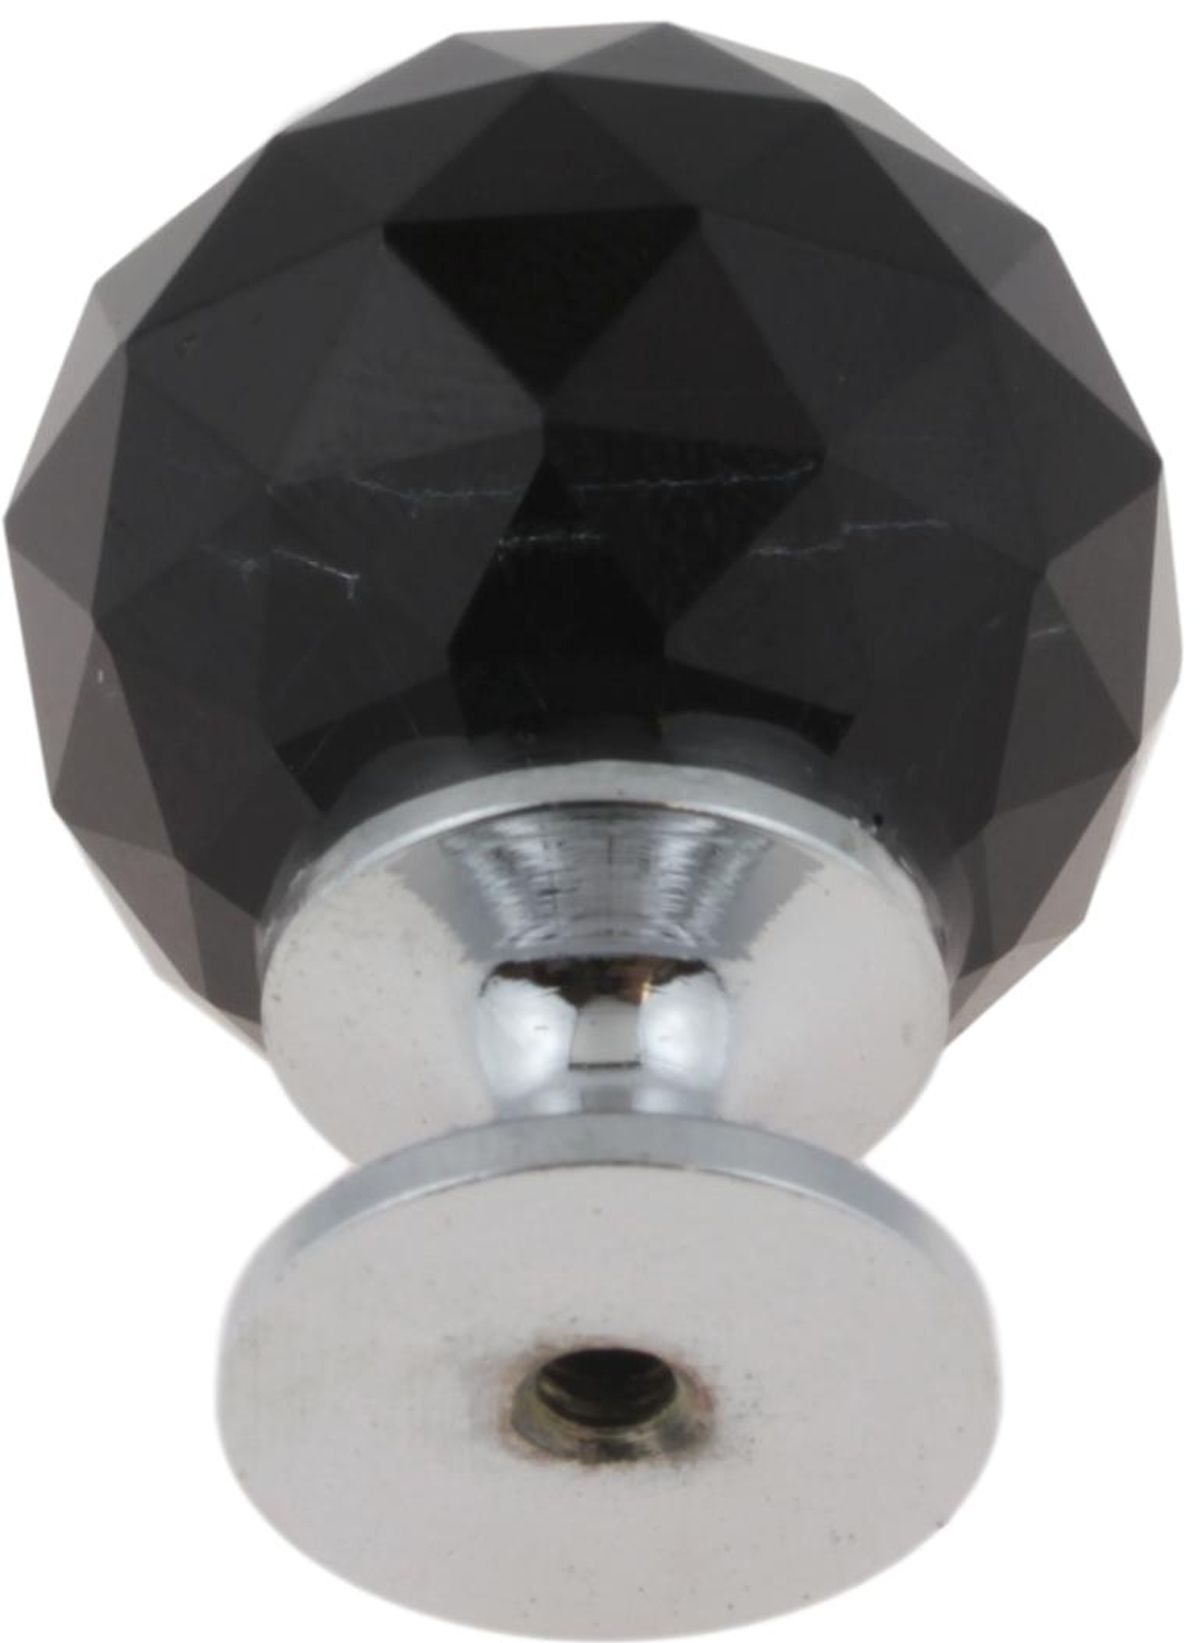 Faceted Glass Knob - Polished Chrome and Black P30779W-264-CP